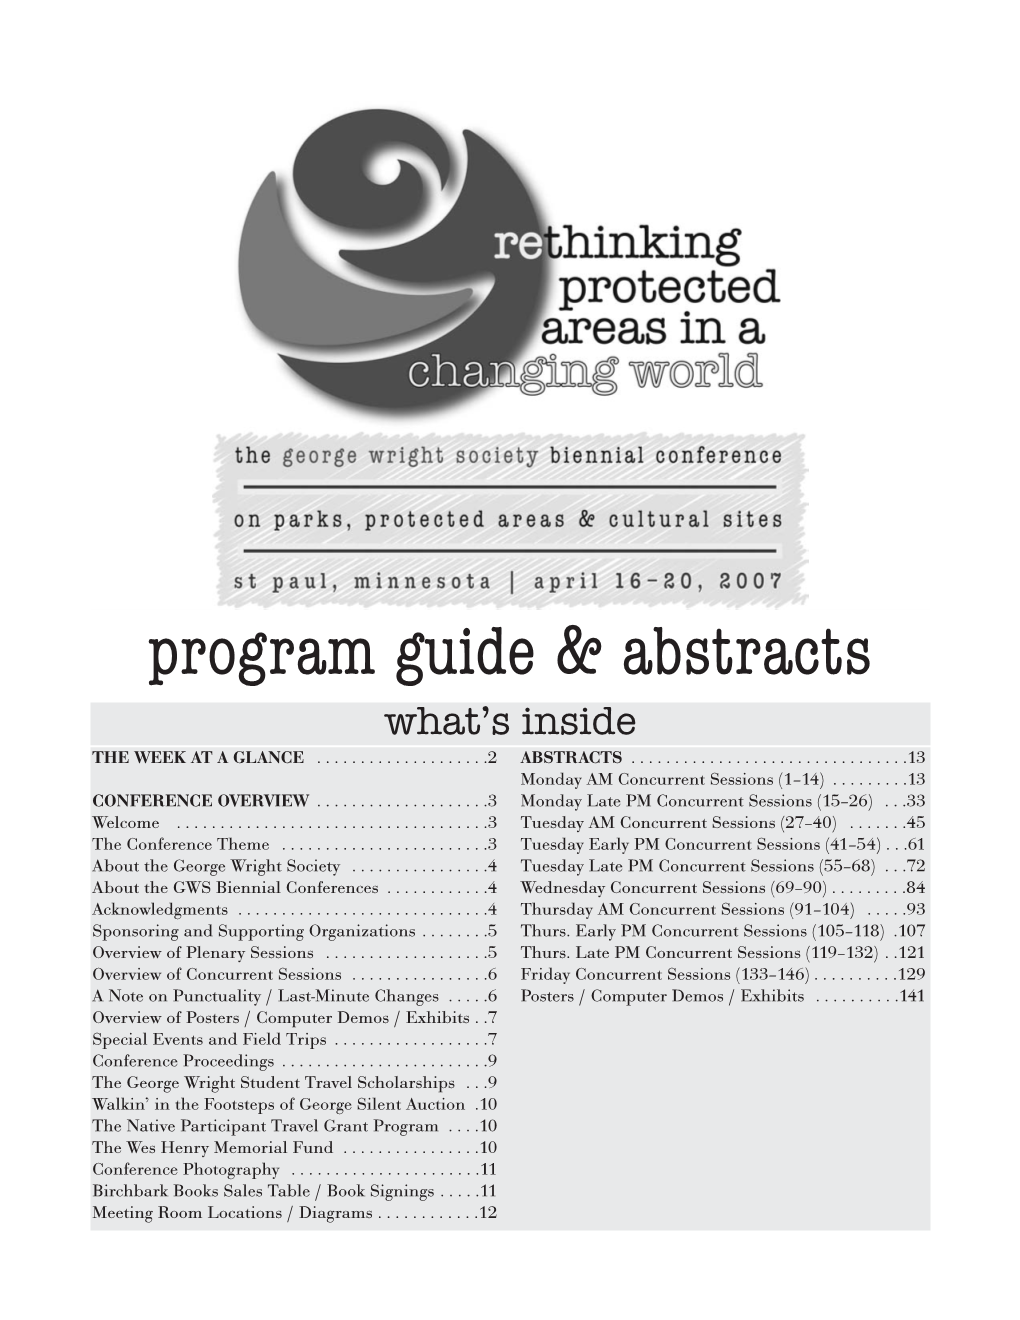 Program Guide & Abstracts